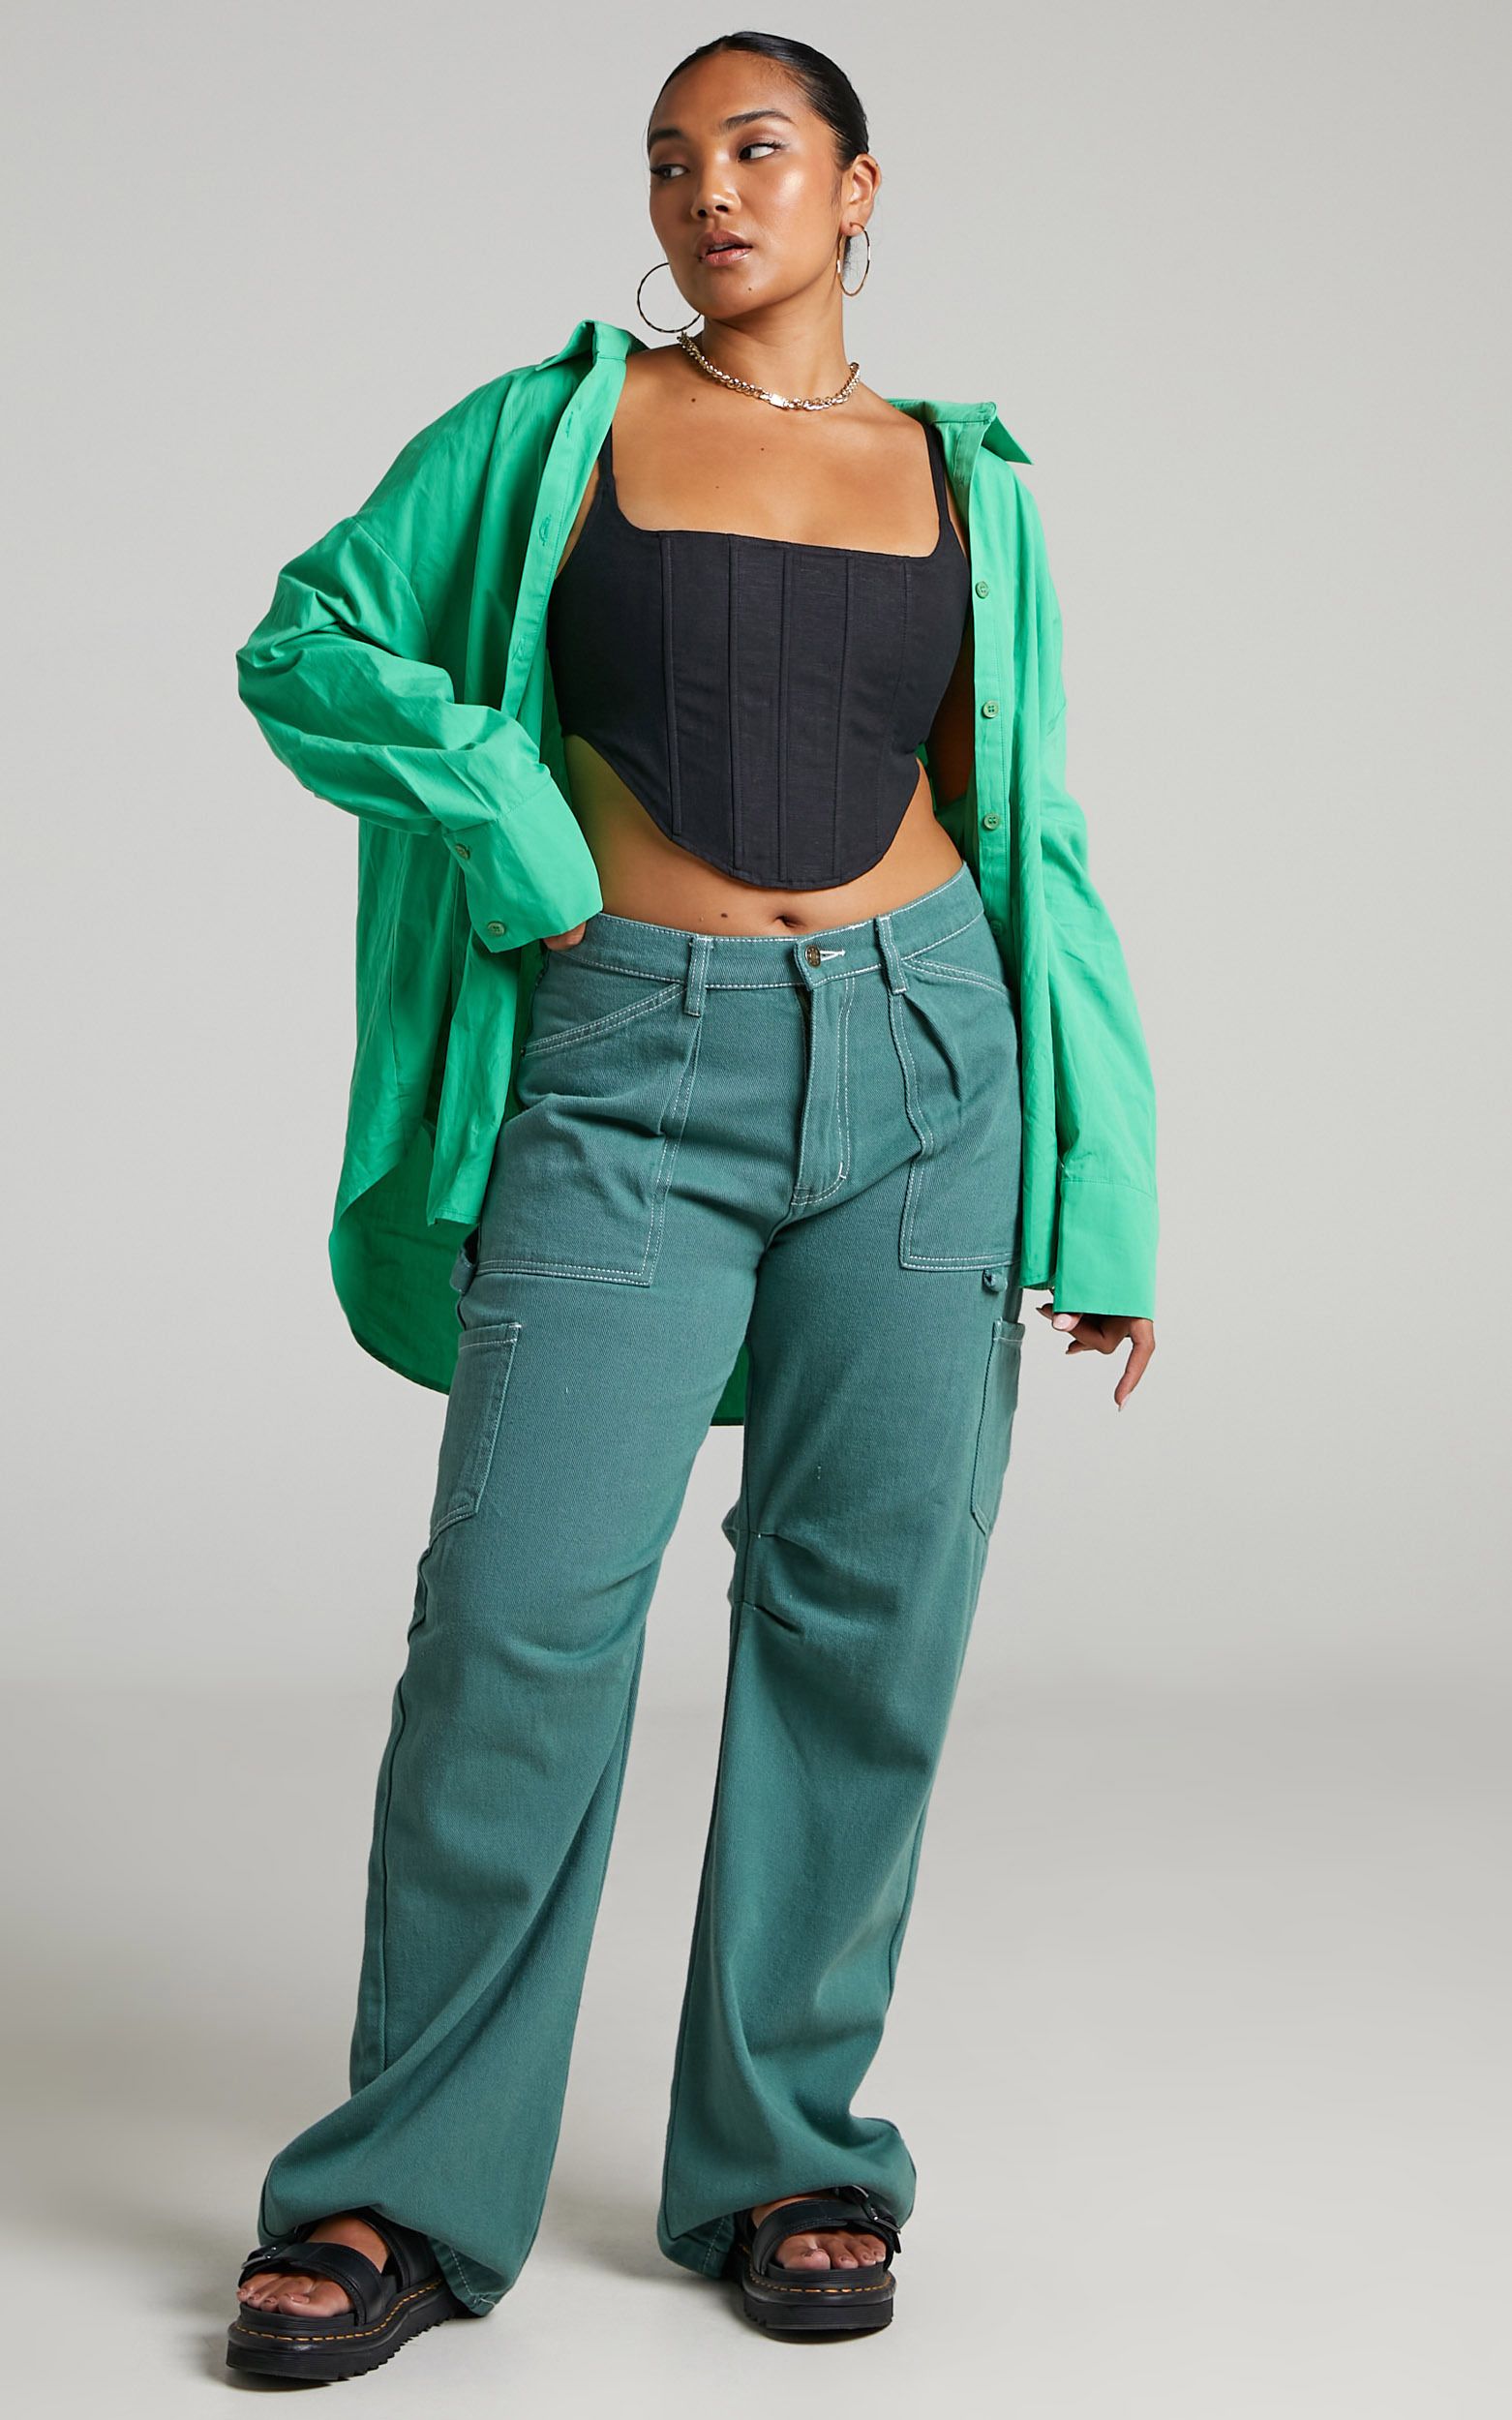 LIONESS - Miami Vice Pant in Forest Green | Showpo - deactived